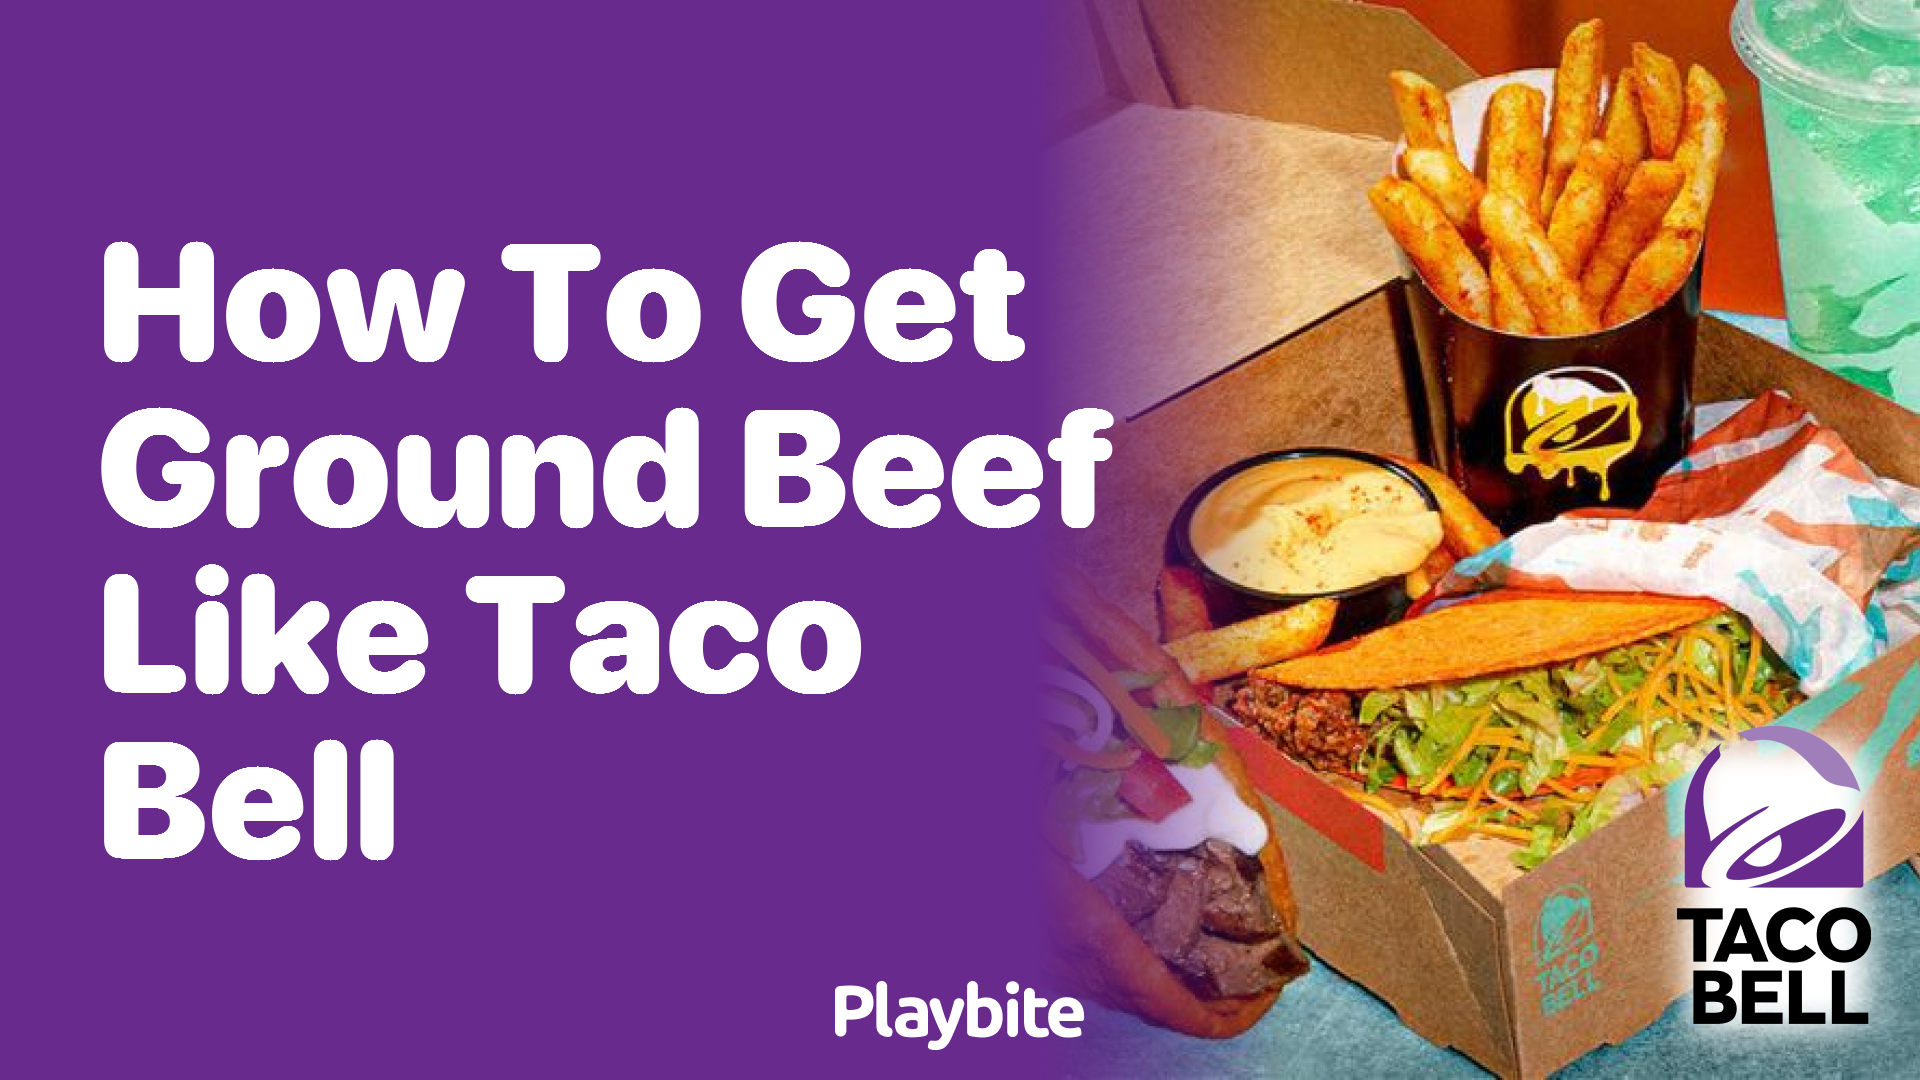 How to Get Ground Beef Like Taco Bell